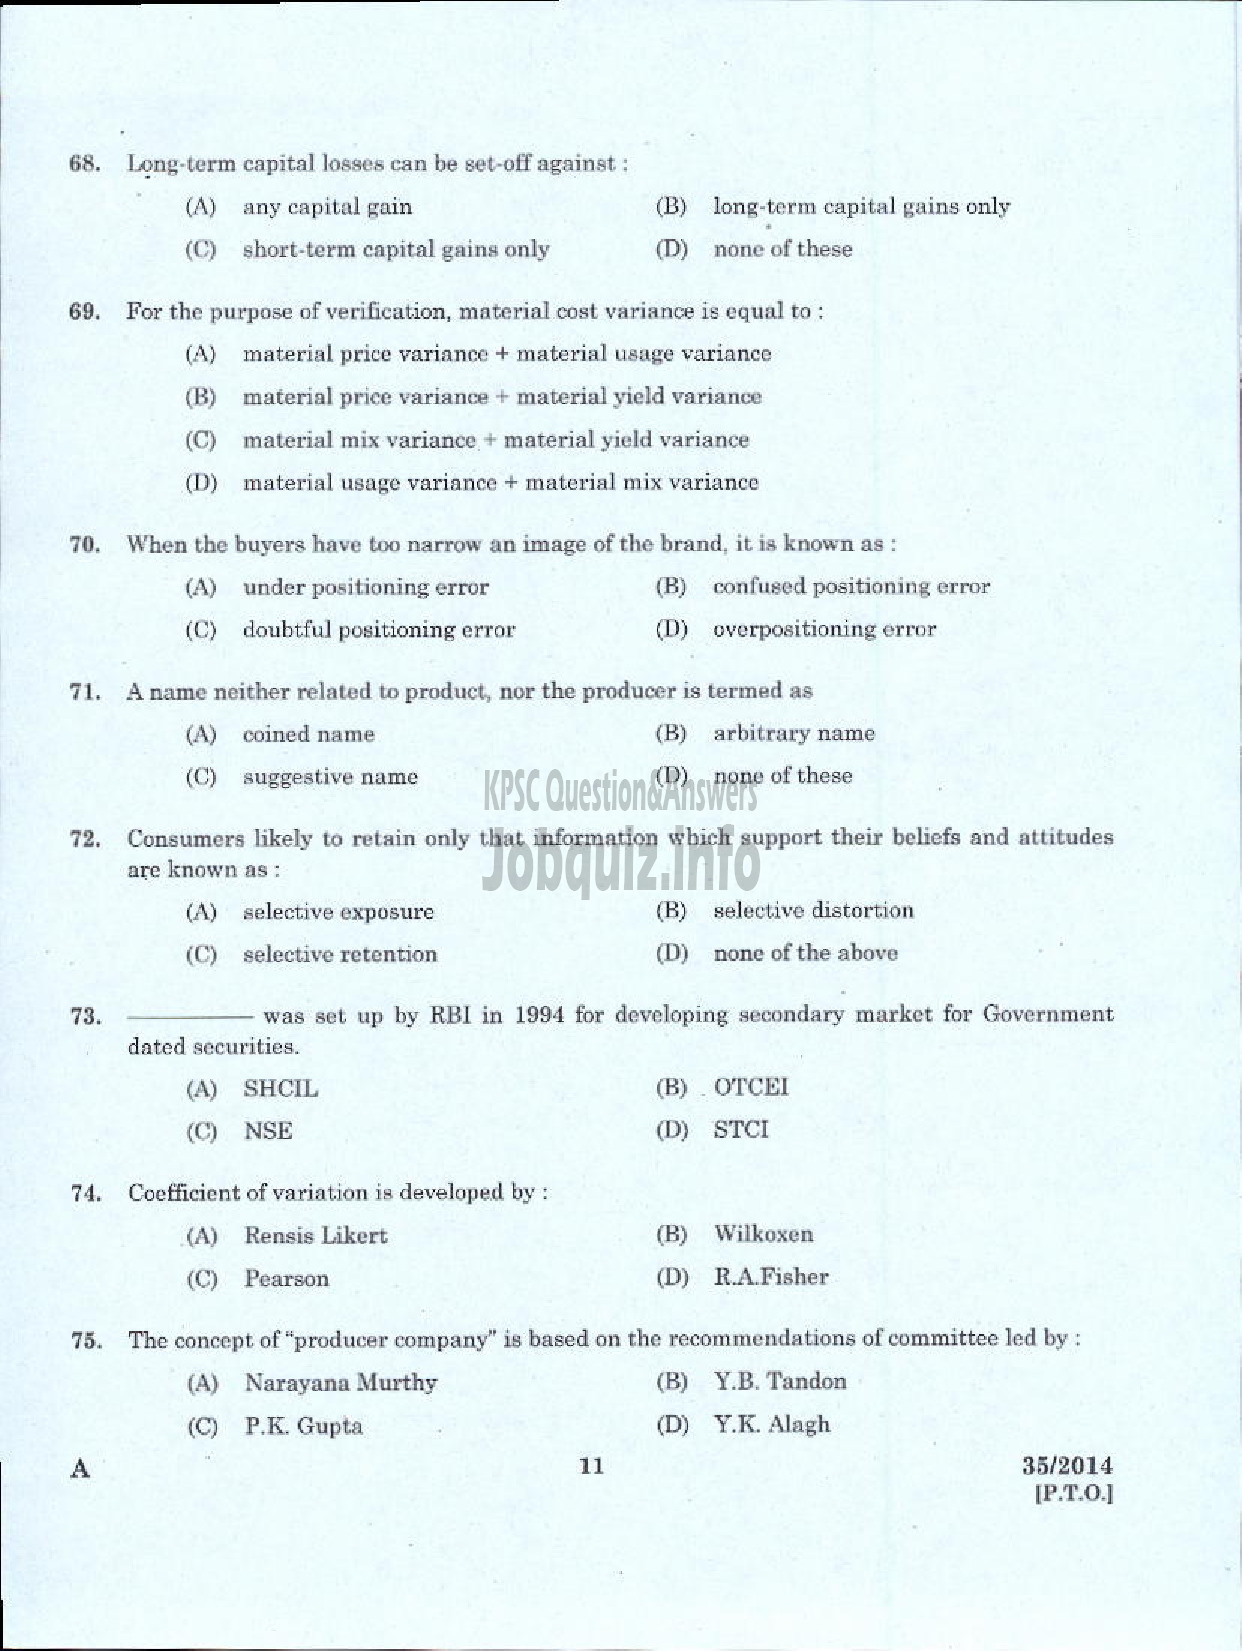 Kerala PSC Question Paper - JUNIOR ASSISTANT ACCOUNTS SR FOR ST ONLY TRAVANCORE COCHIN CHEMICALS LIMITED-9